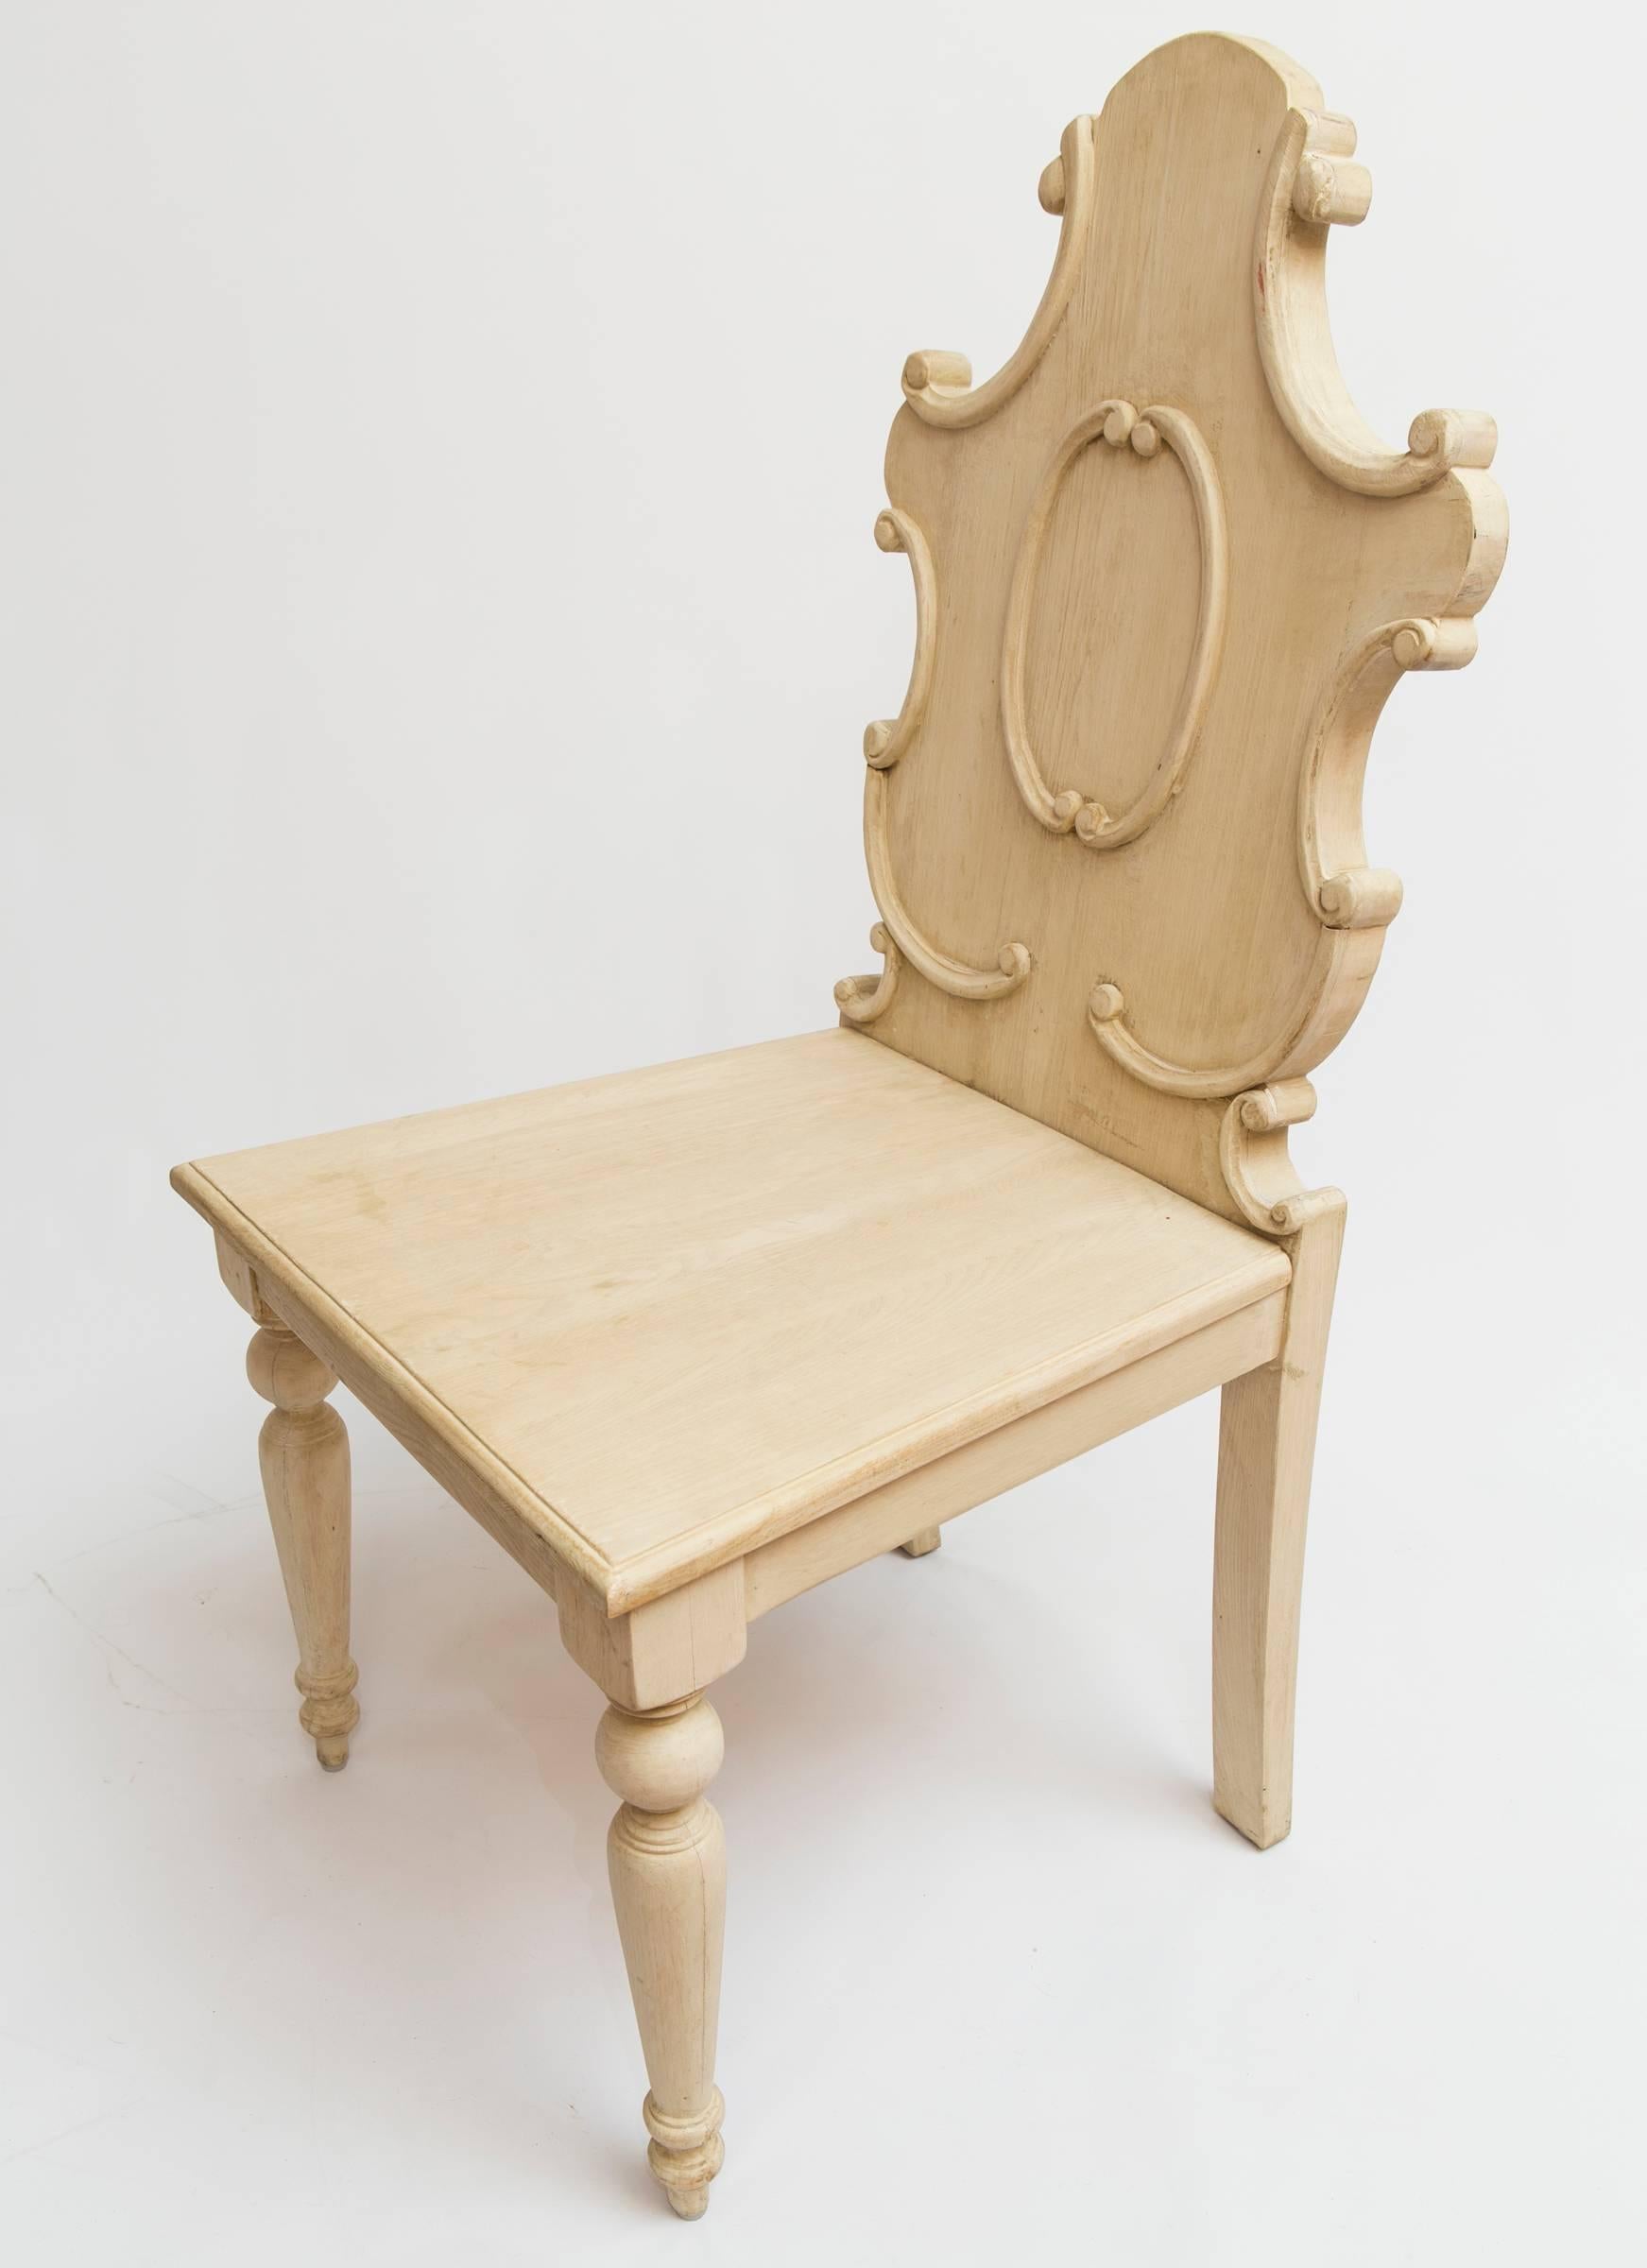 Pair of sculptural wooden side or hall chairs in painted wood.  The chairs have a shaped back with scroll details and a wood seat.  